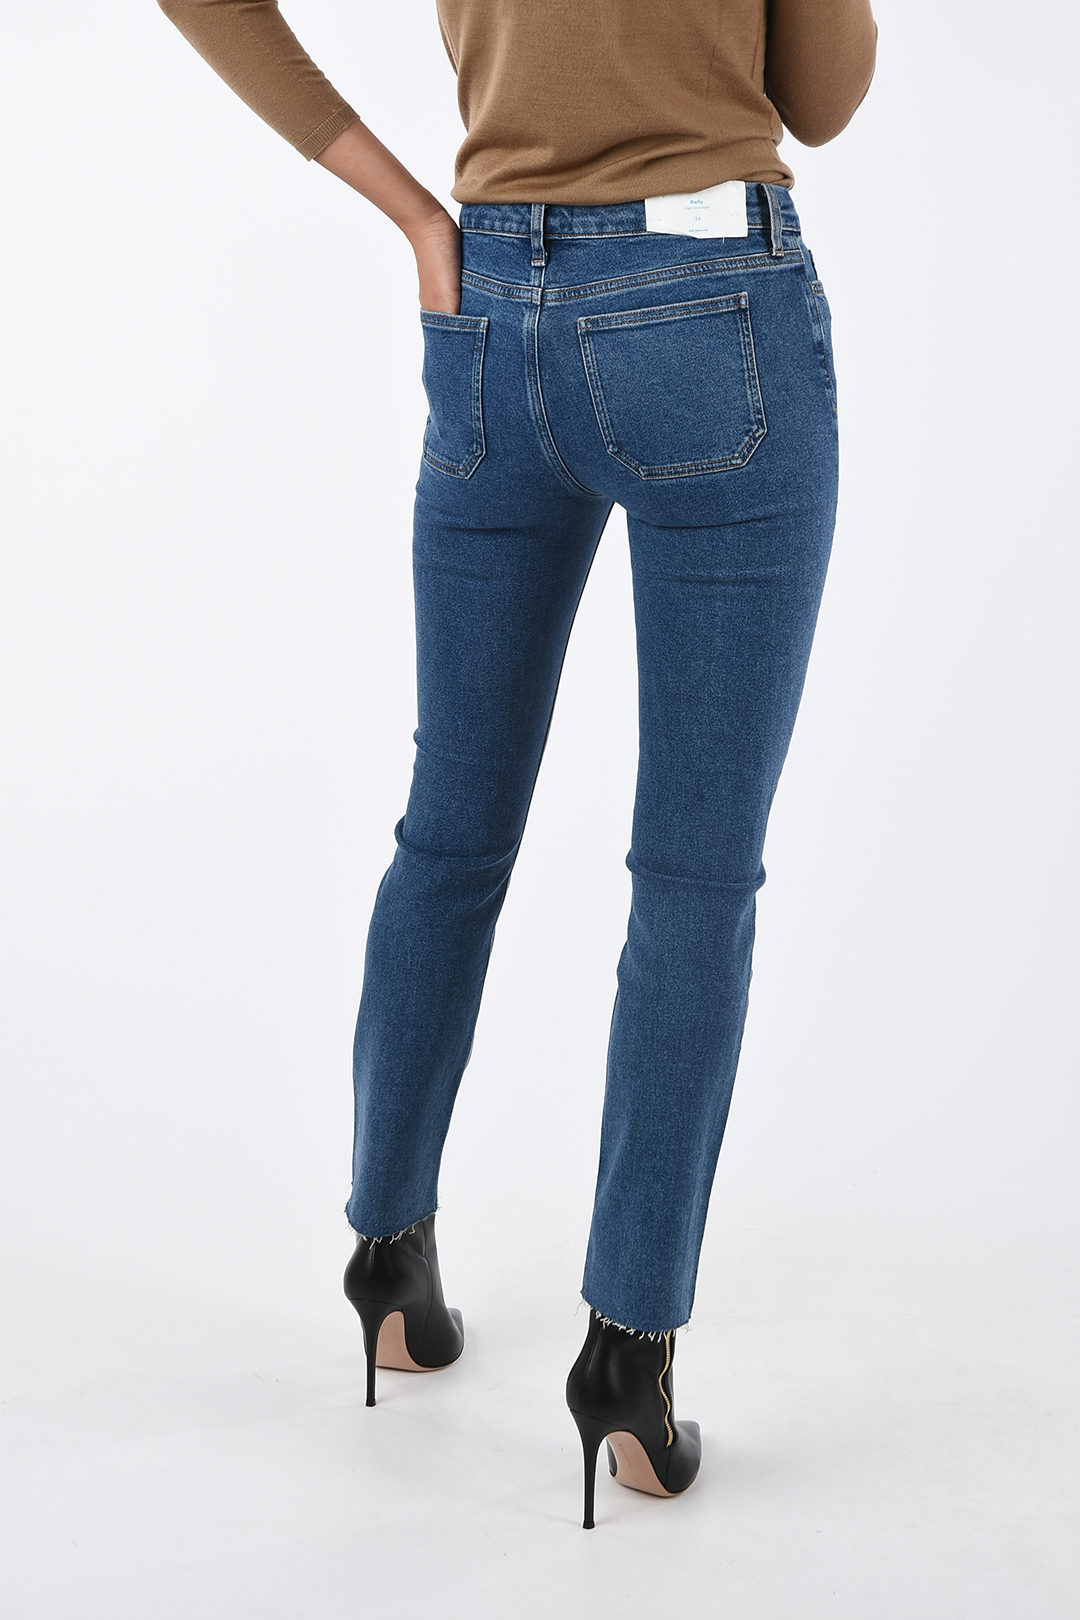 M.I.H Jeans Frayed DAILY Jeans women Glamood Outlet